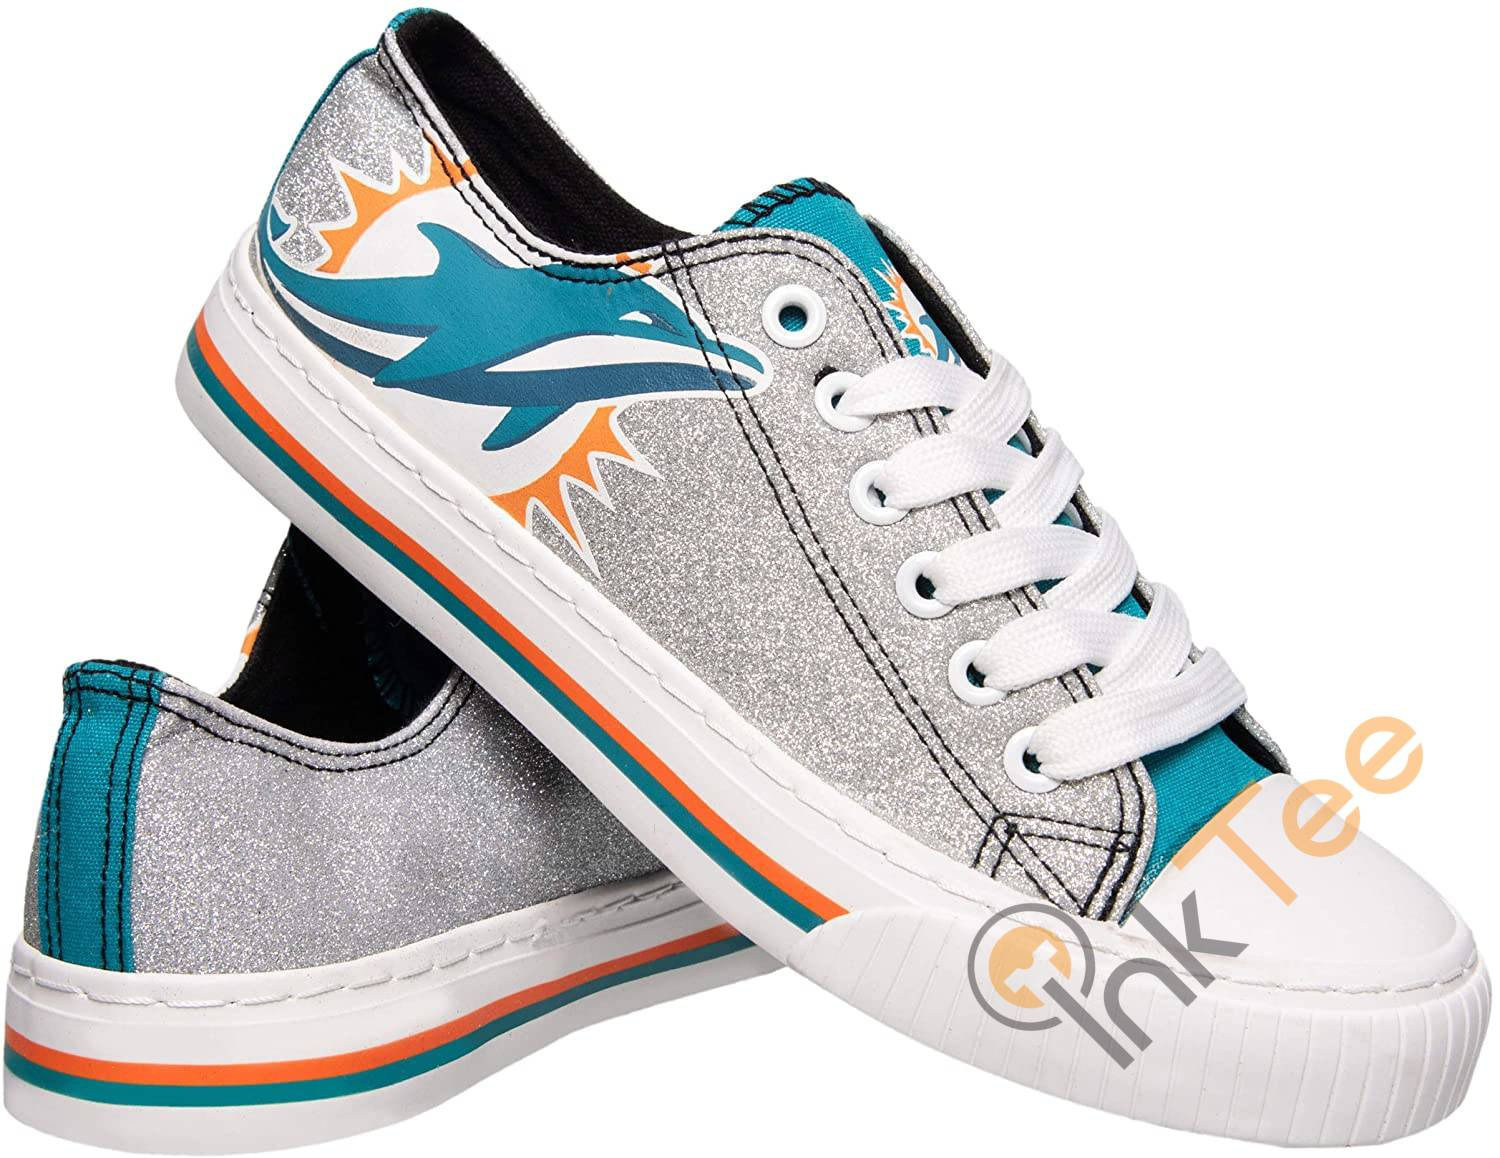 Nfl Miami Dolphins Team Low Top Sneakers